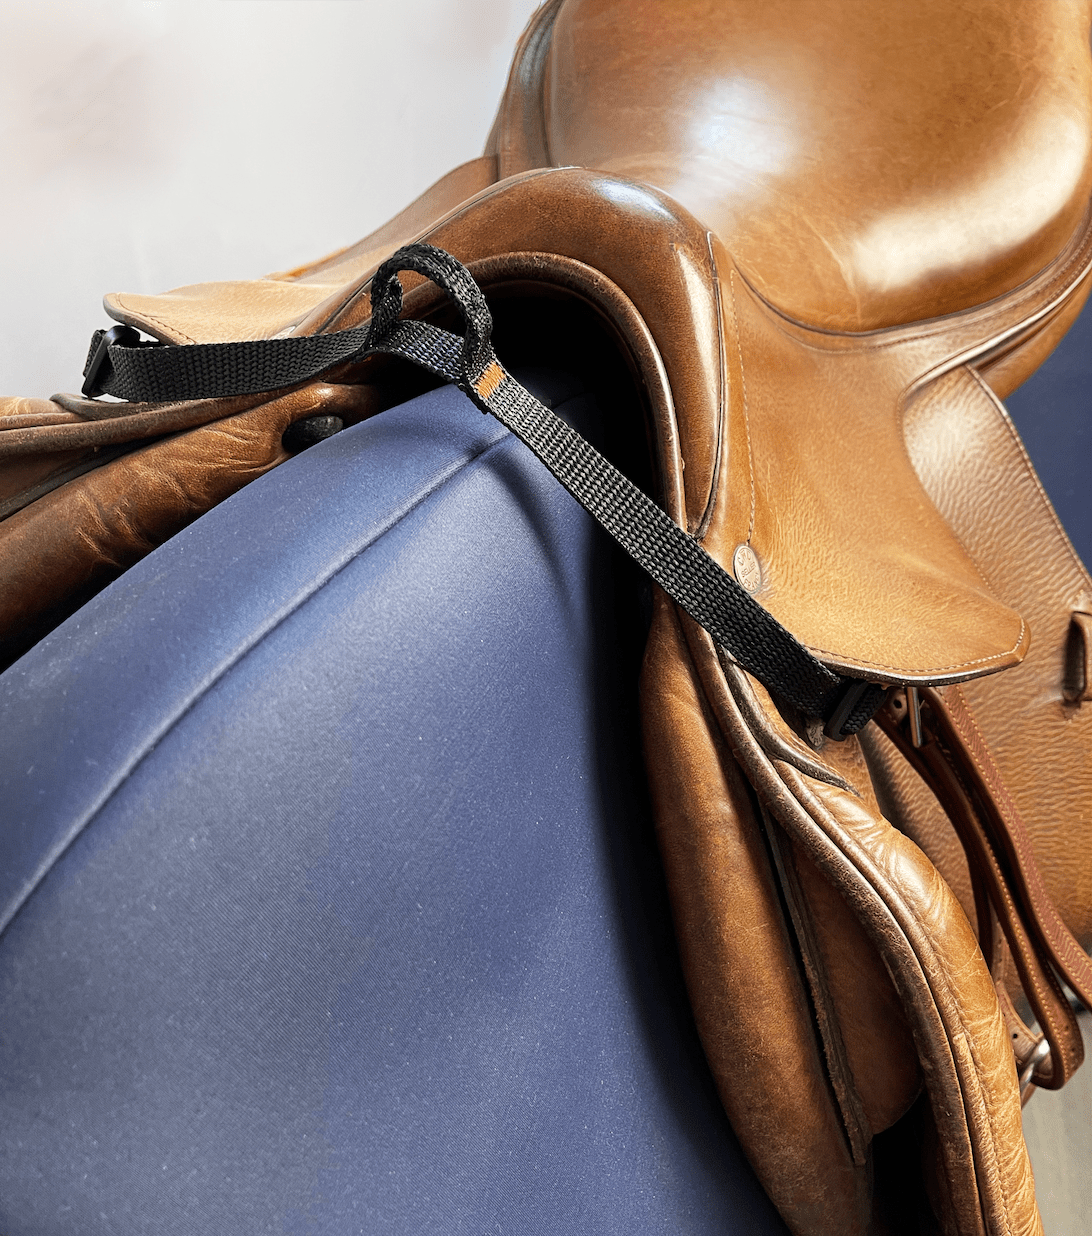 Saddle Y Strap/Connector to Airbag Vest